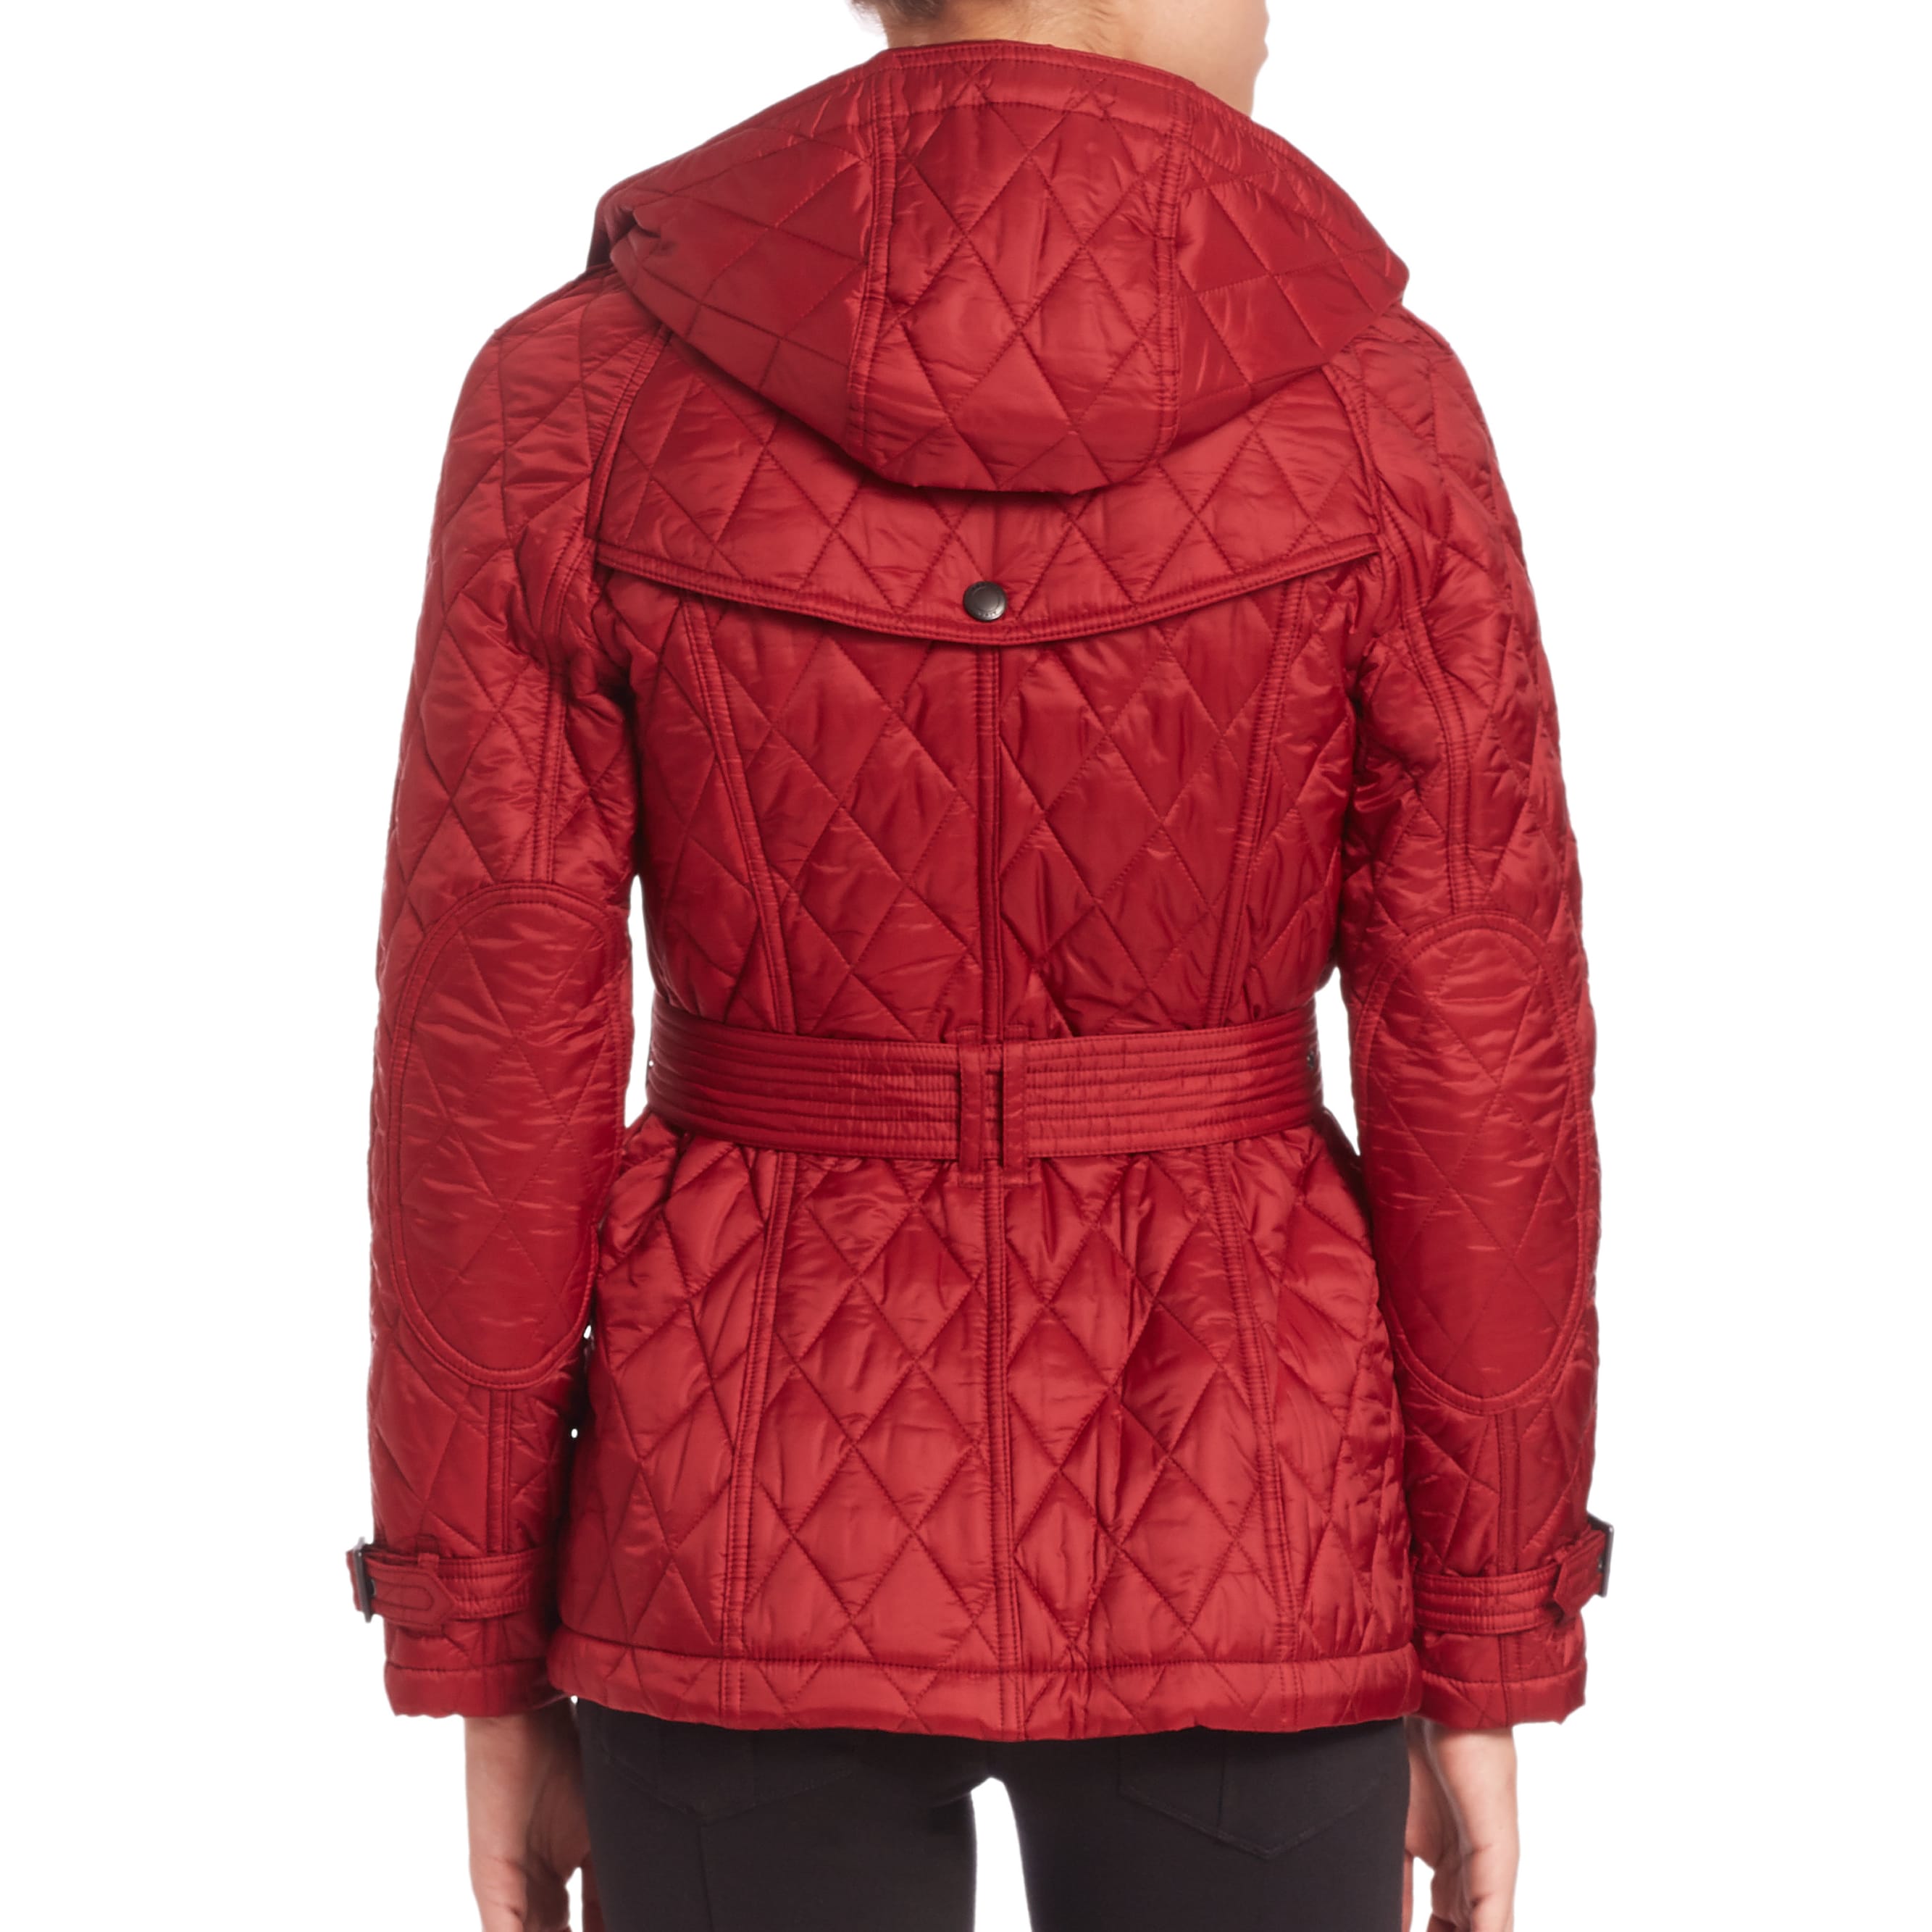 burberry jacket womens red